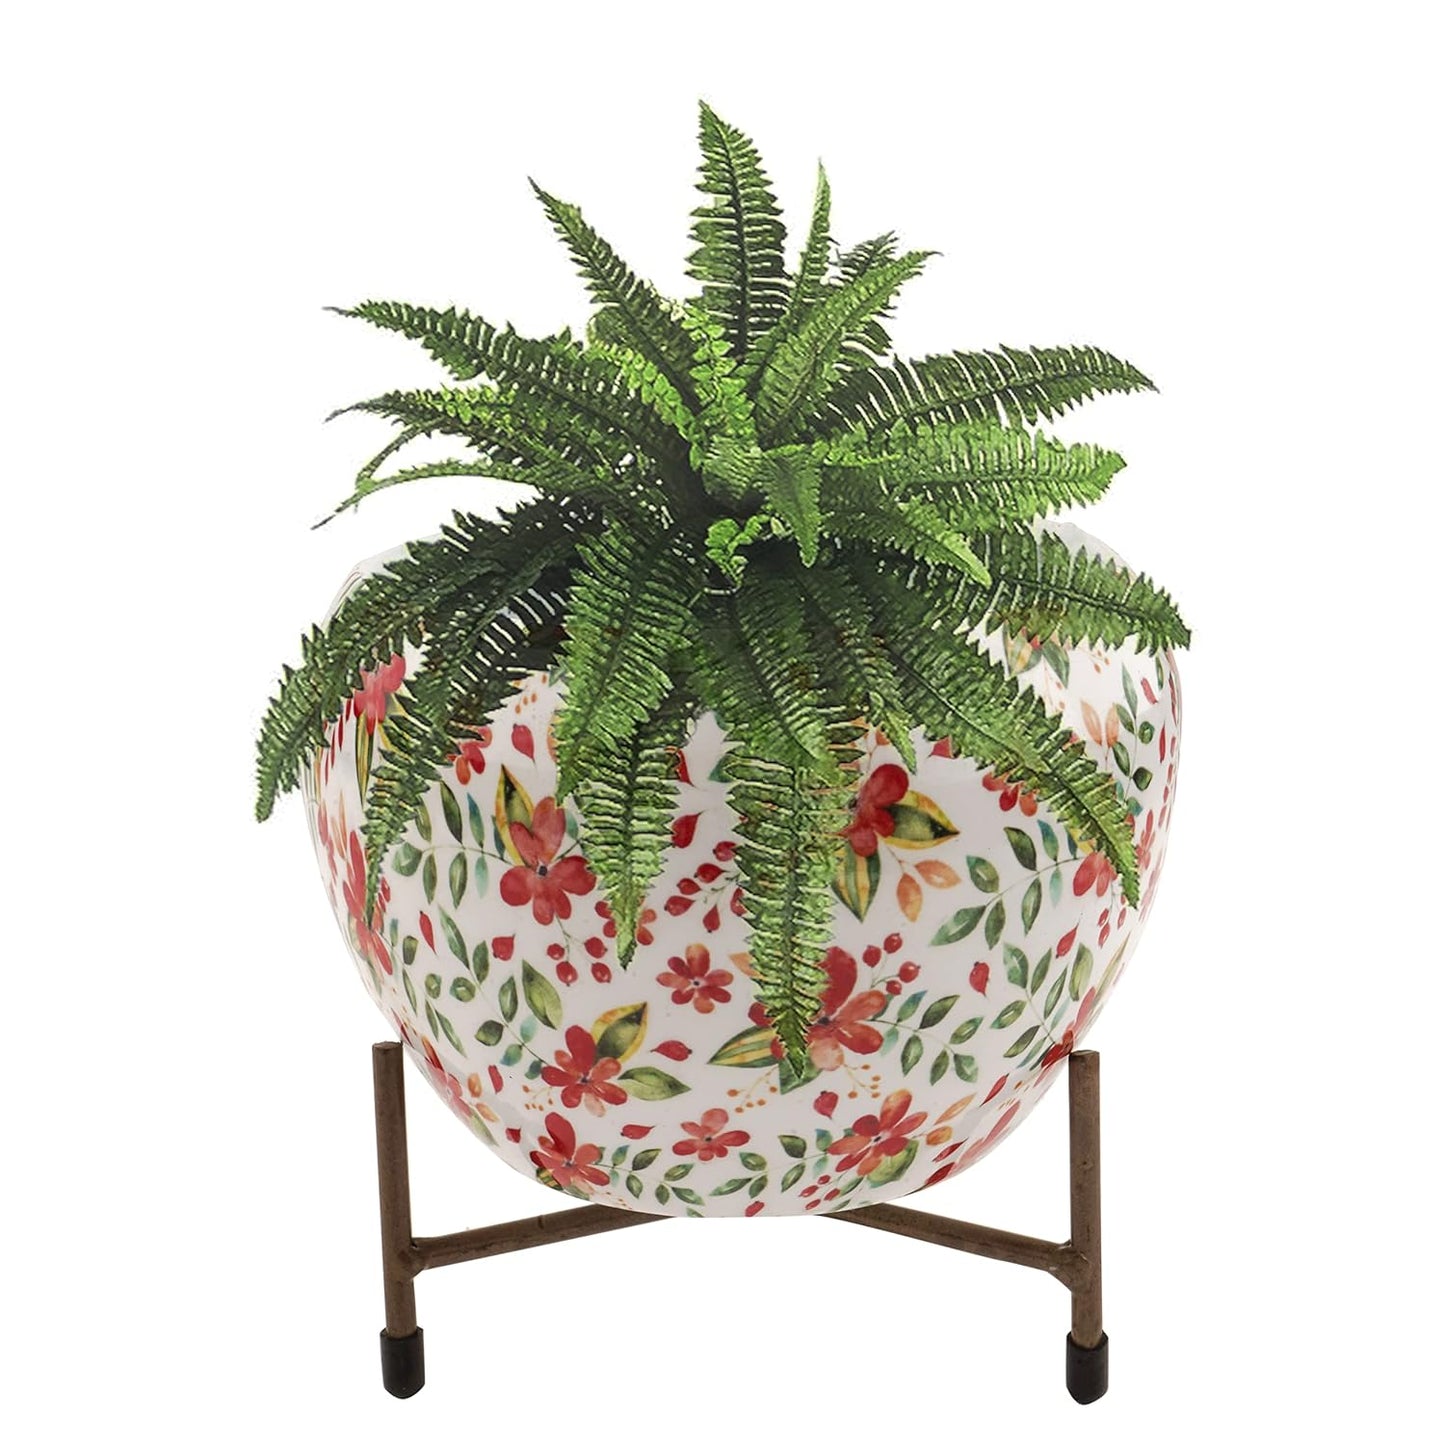 Casa De Amor Printed Planter Flower Pot Container with Iron Stand for Home & Garden Decor (1 Pot & 1 Stand)